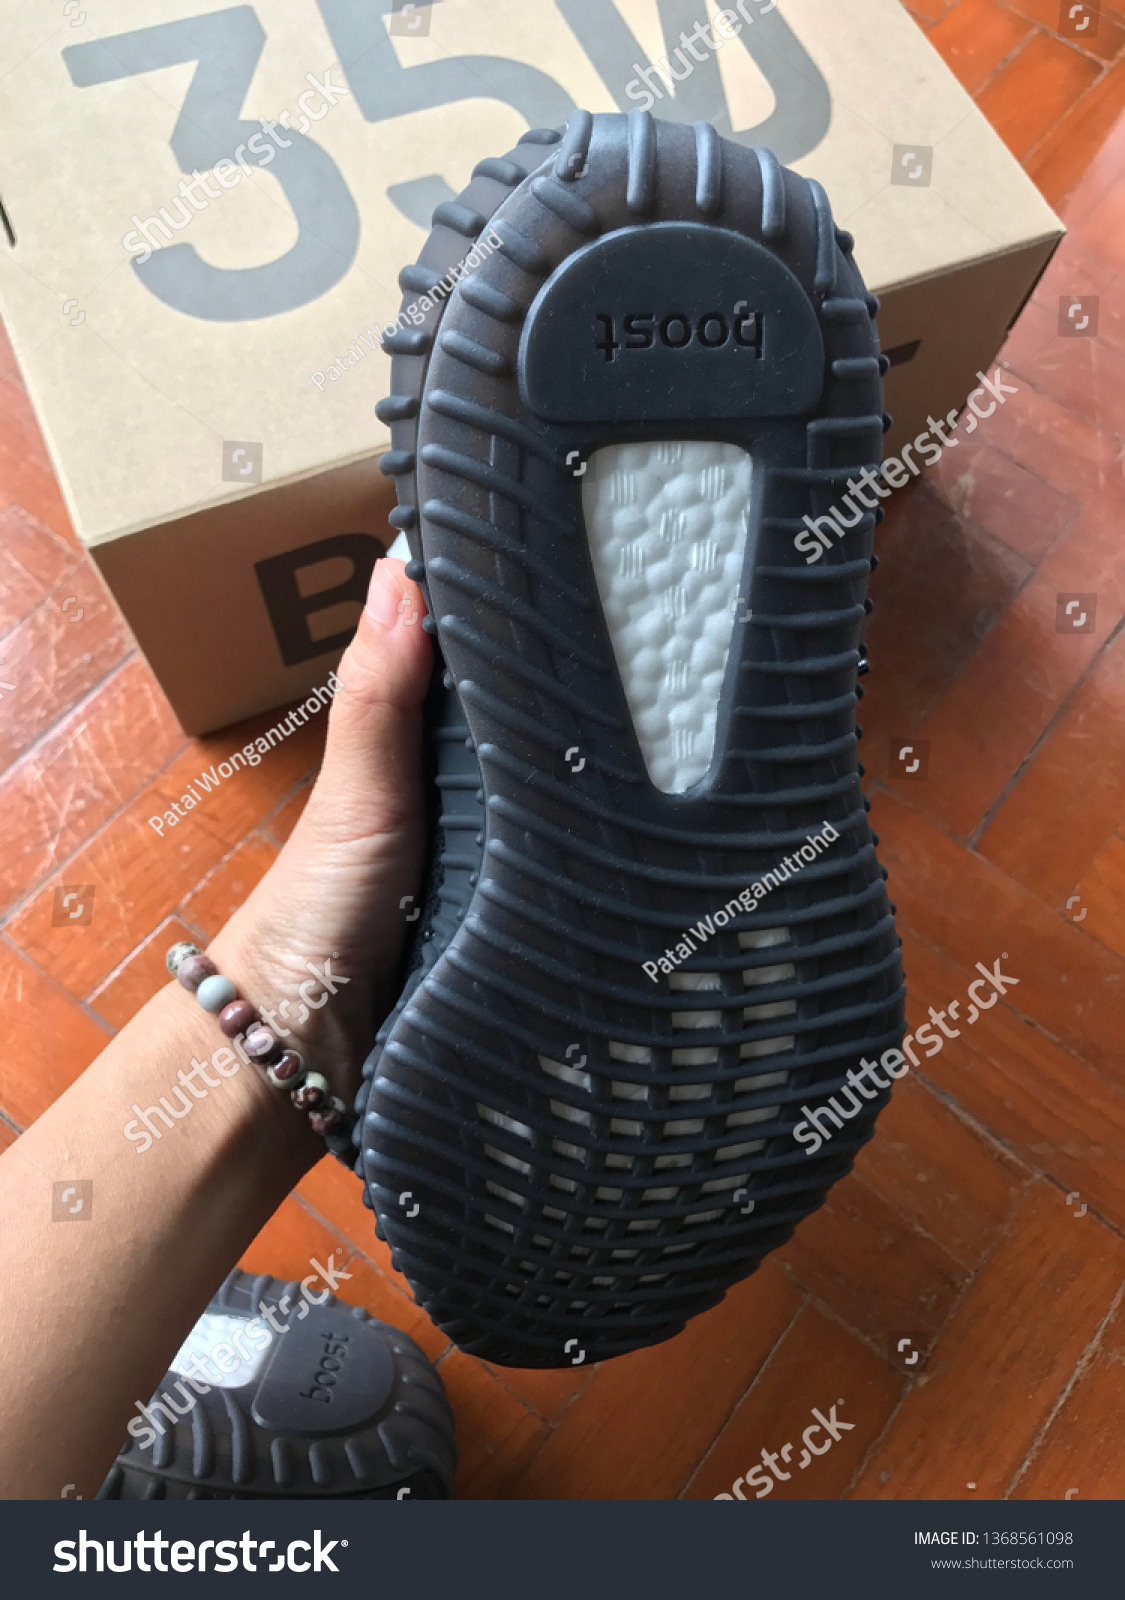 yeezy shoes size 5